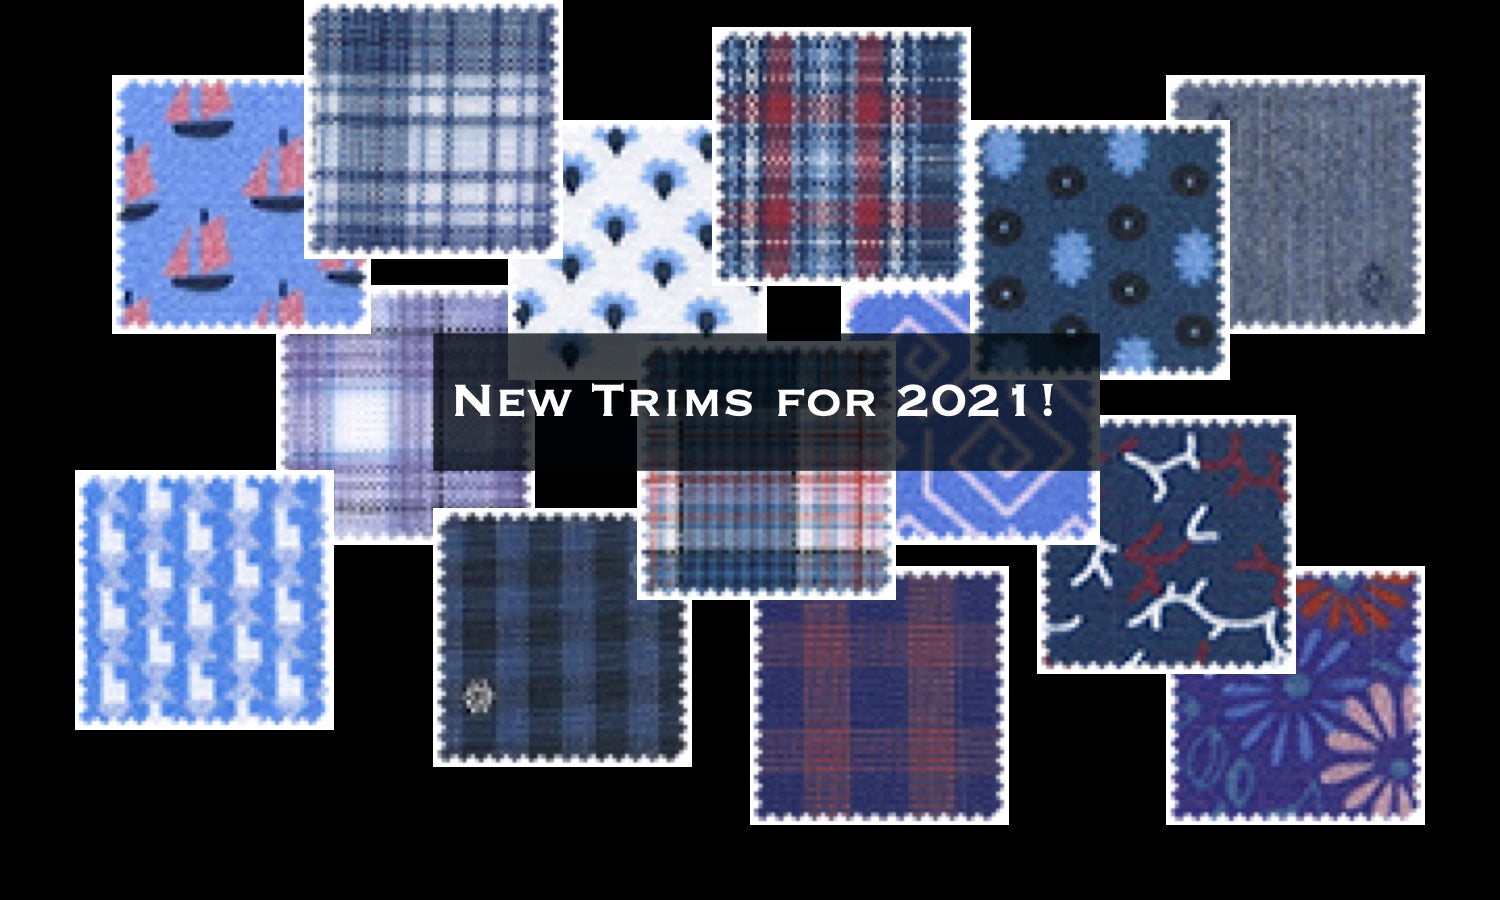 February 2021 Woven Trims